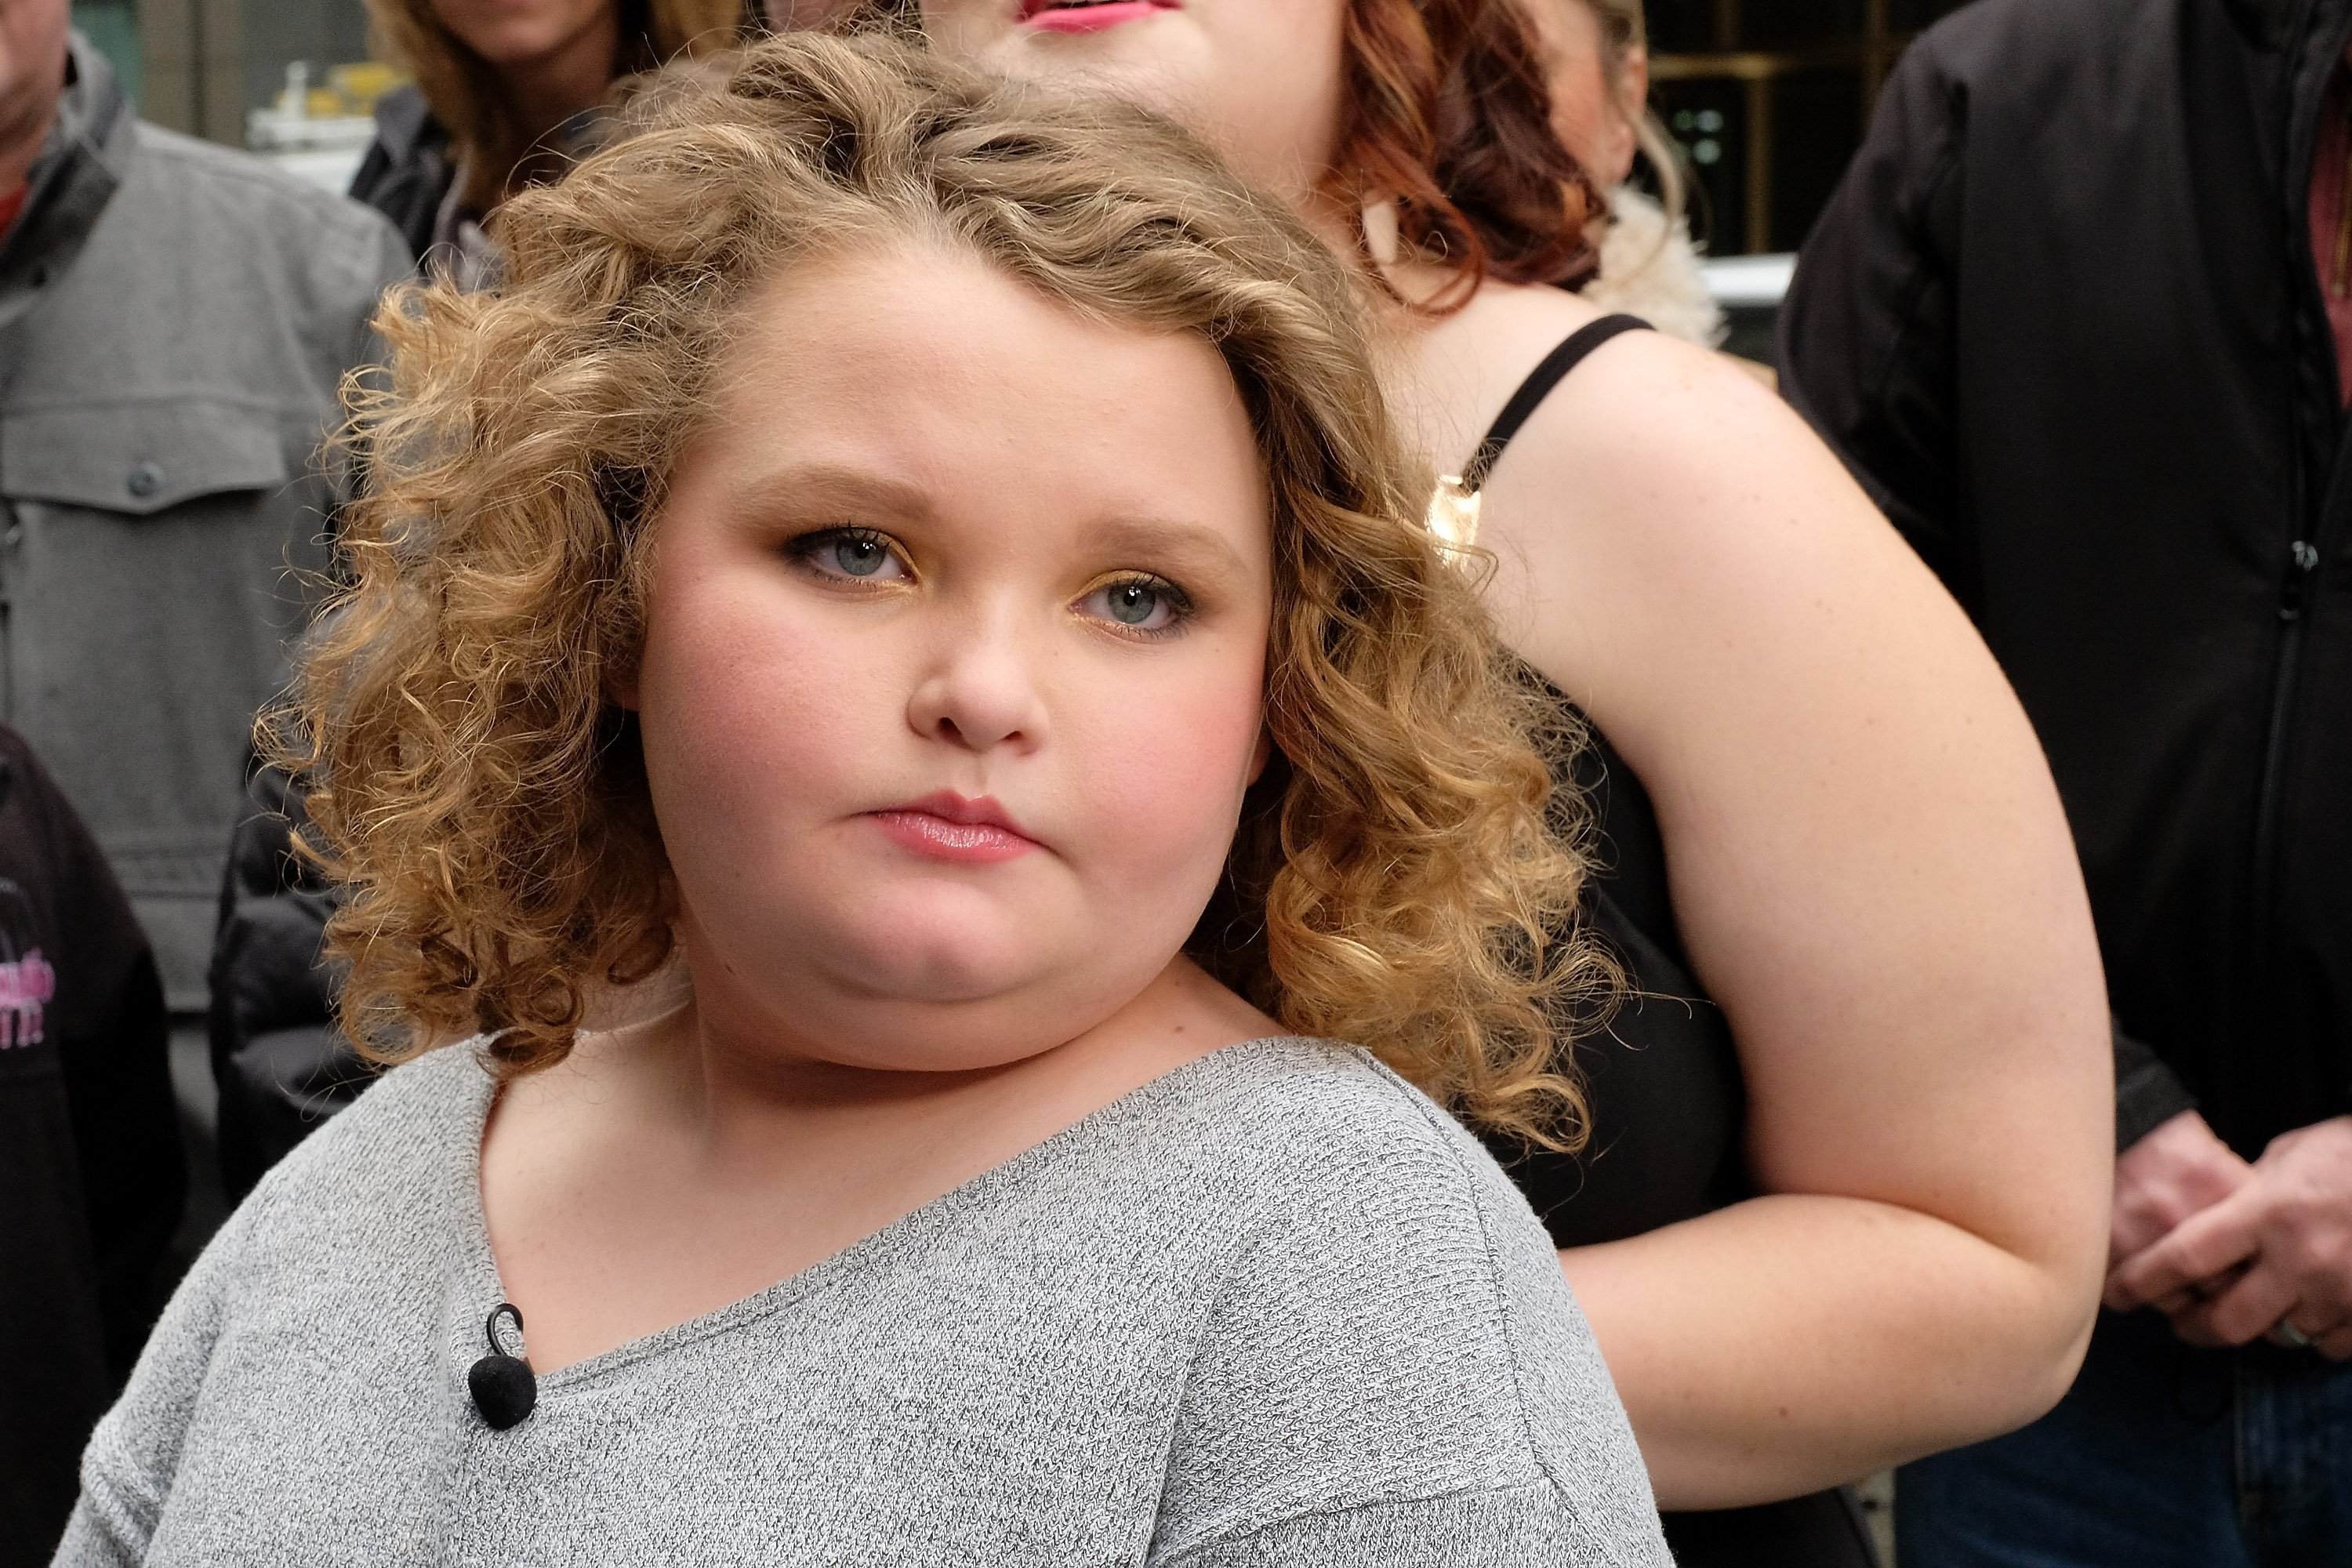 Alana "Honey Boo Boo" Thompson visits "Extra" in Times Square, New York City on February 22, 2017 | Photo: Getty Images